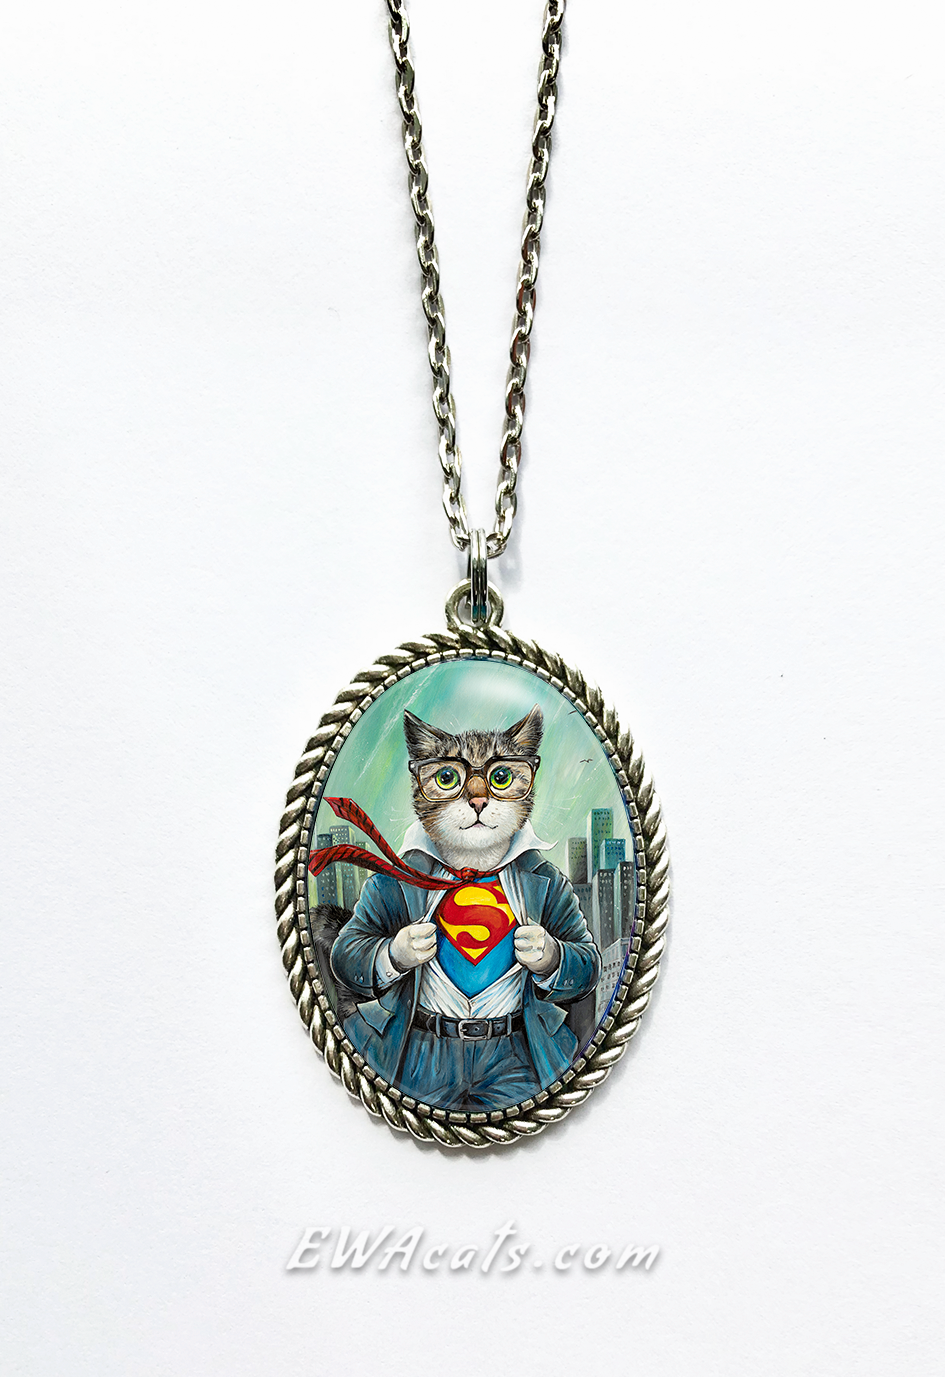 Necklace "The Cat of Steel"